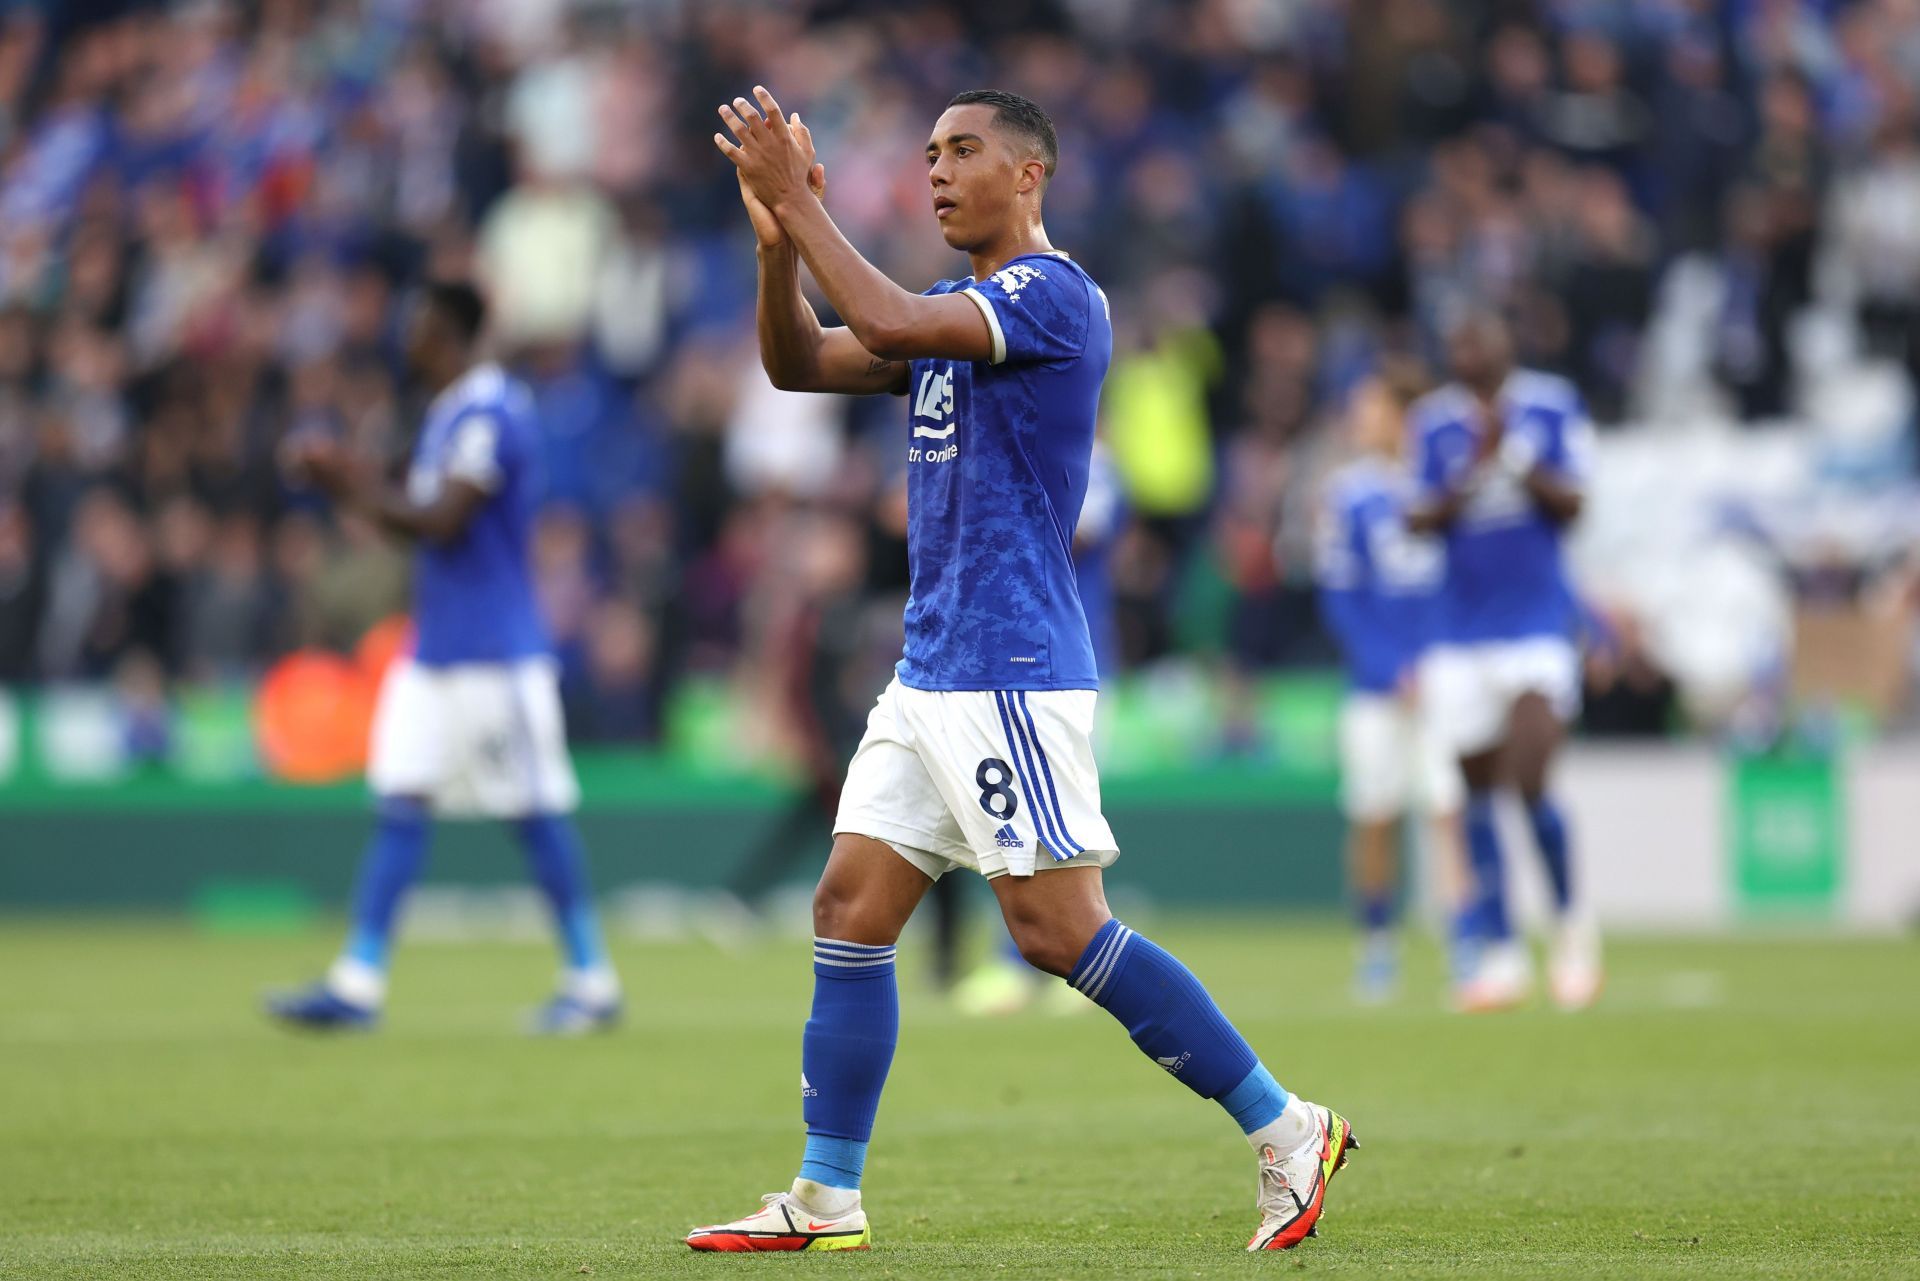 Youri Tielemans has rejected a contract extension offer from Leicester City.